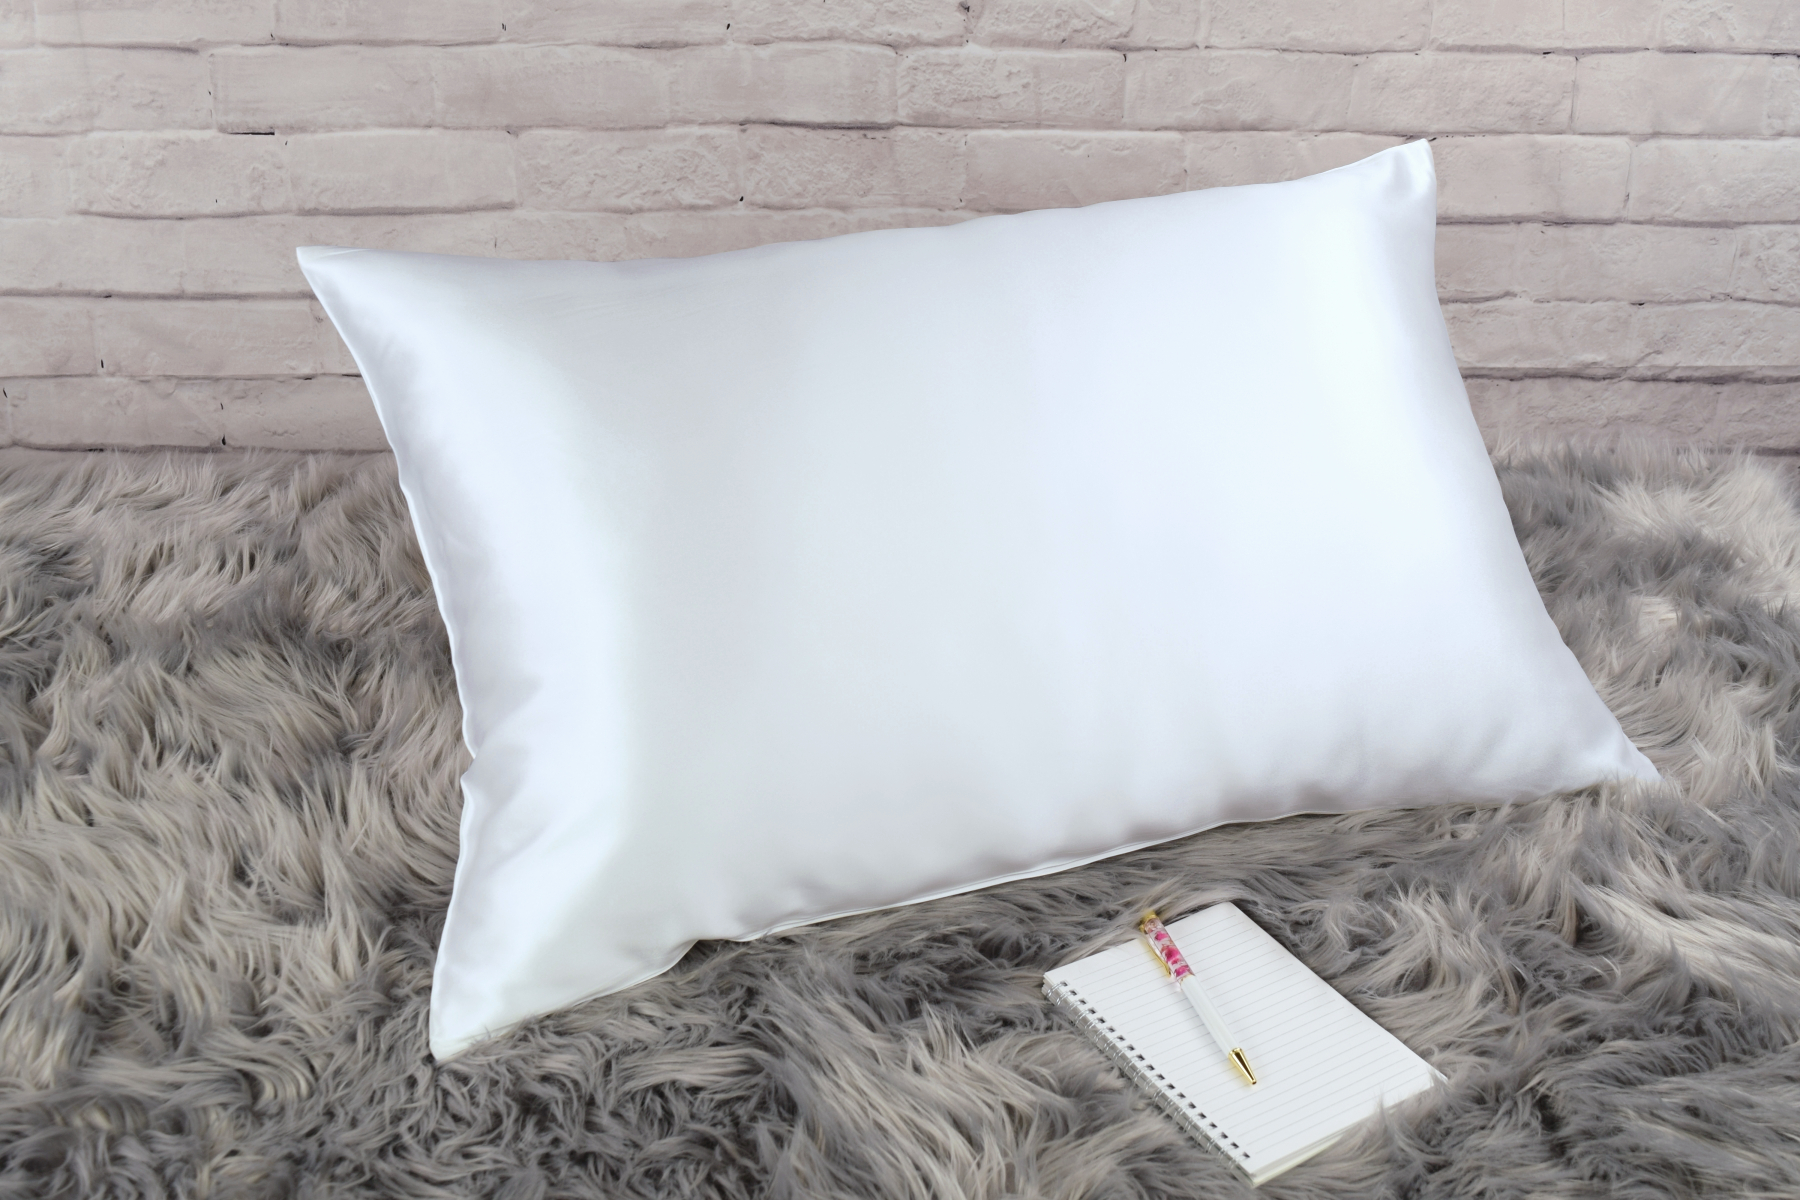 100% Silk Pillowcase for Hair Zippered Luxury 25 Momme Mulberry Silk Charmeuse Silk on Both Sides of Cover -Gift Wrapped- (King, White) - image 4 of 7